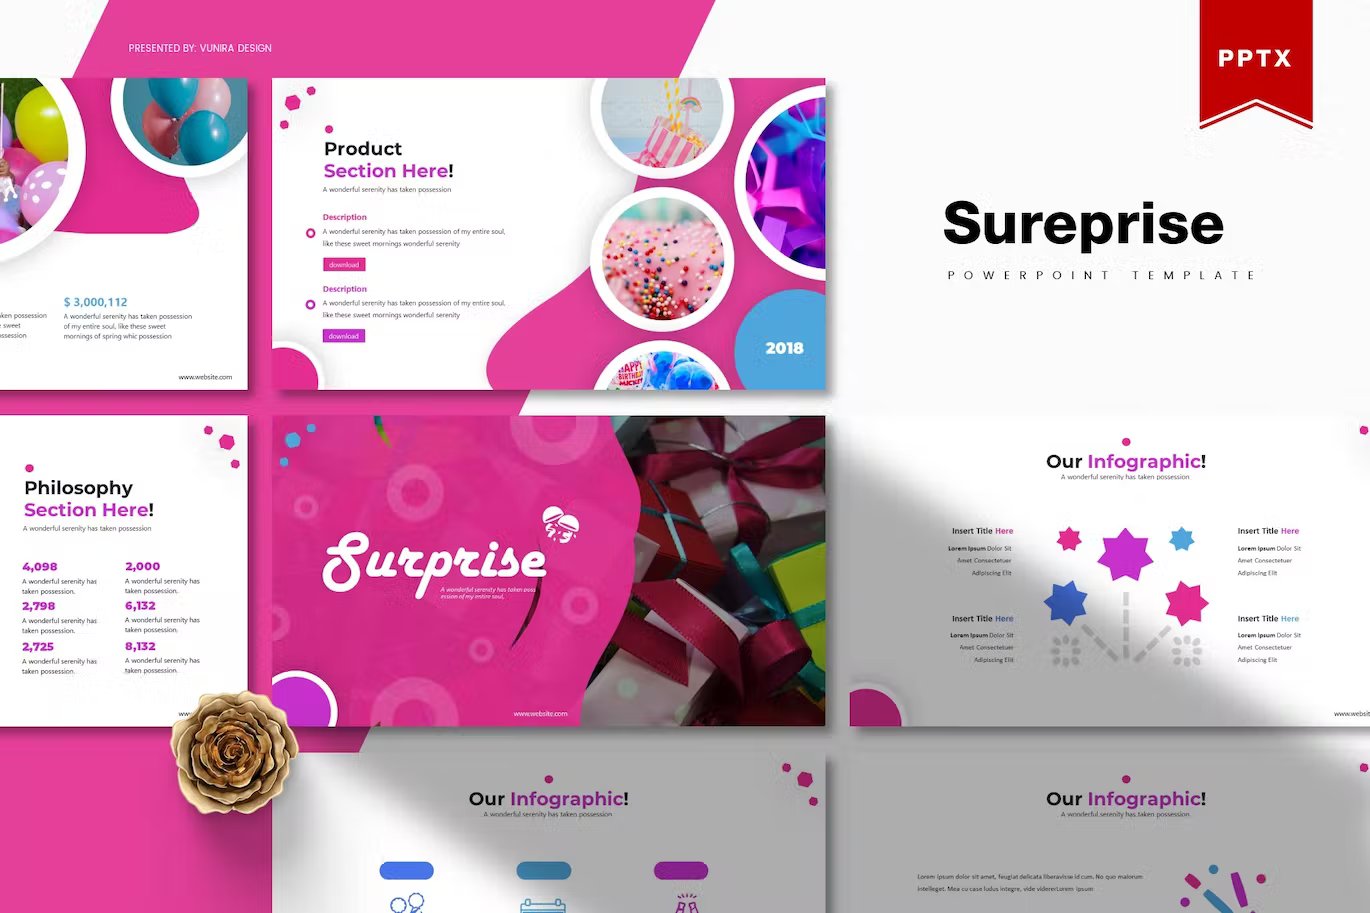 Black lettering "Sureprise Powerpoint Template" and different presentation templates in pink, white, purple and black on a white background.